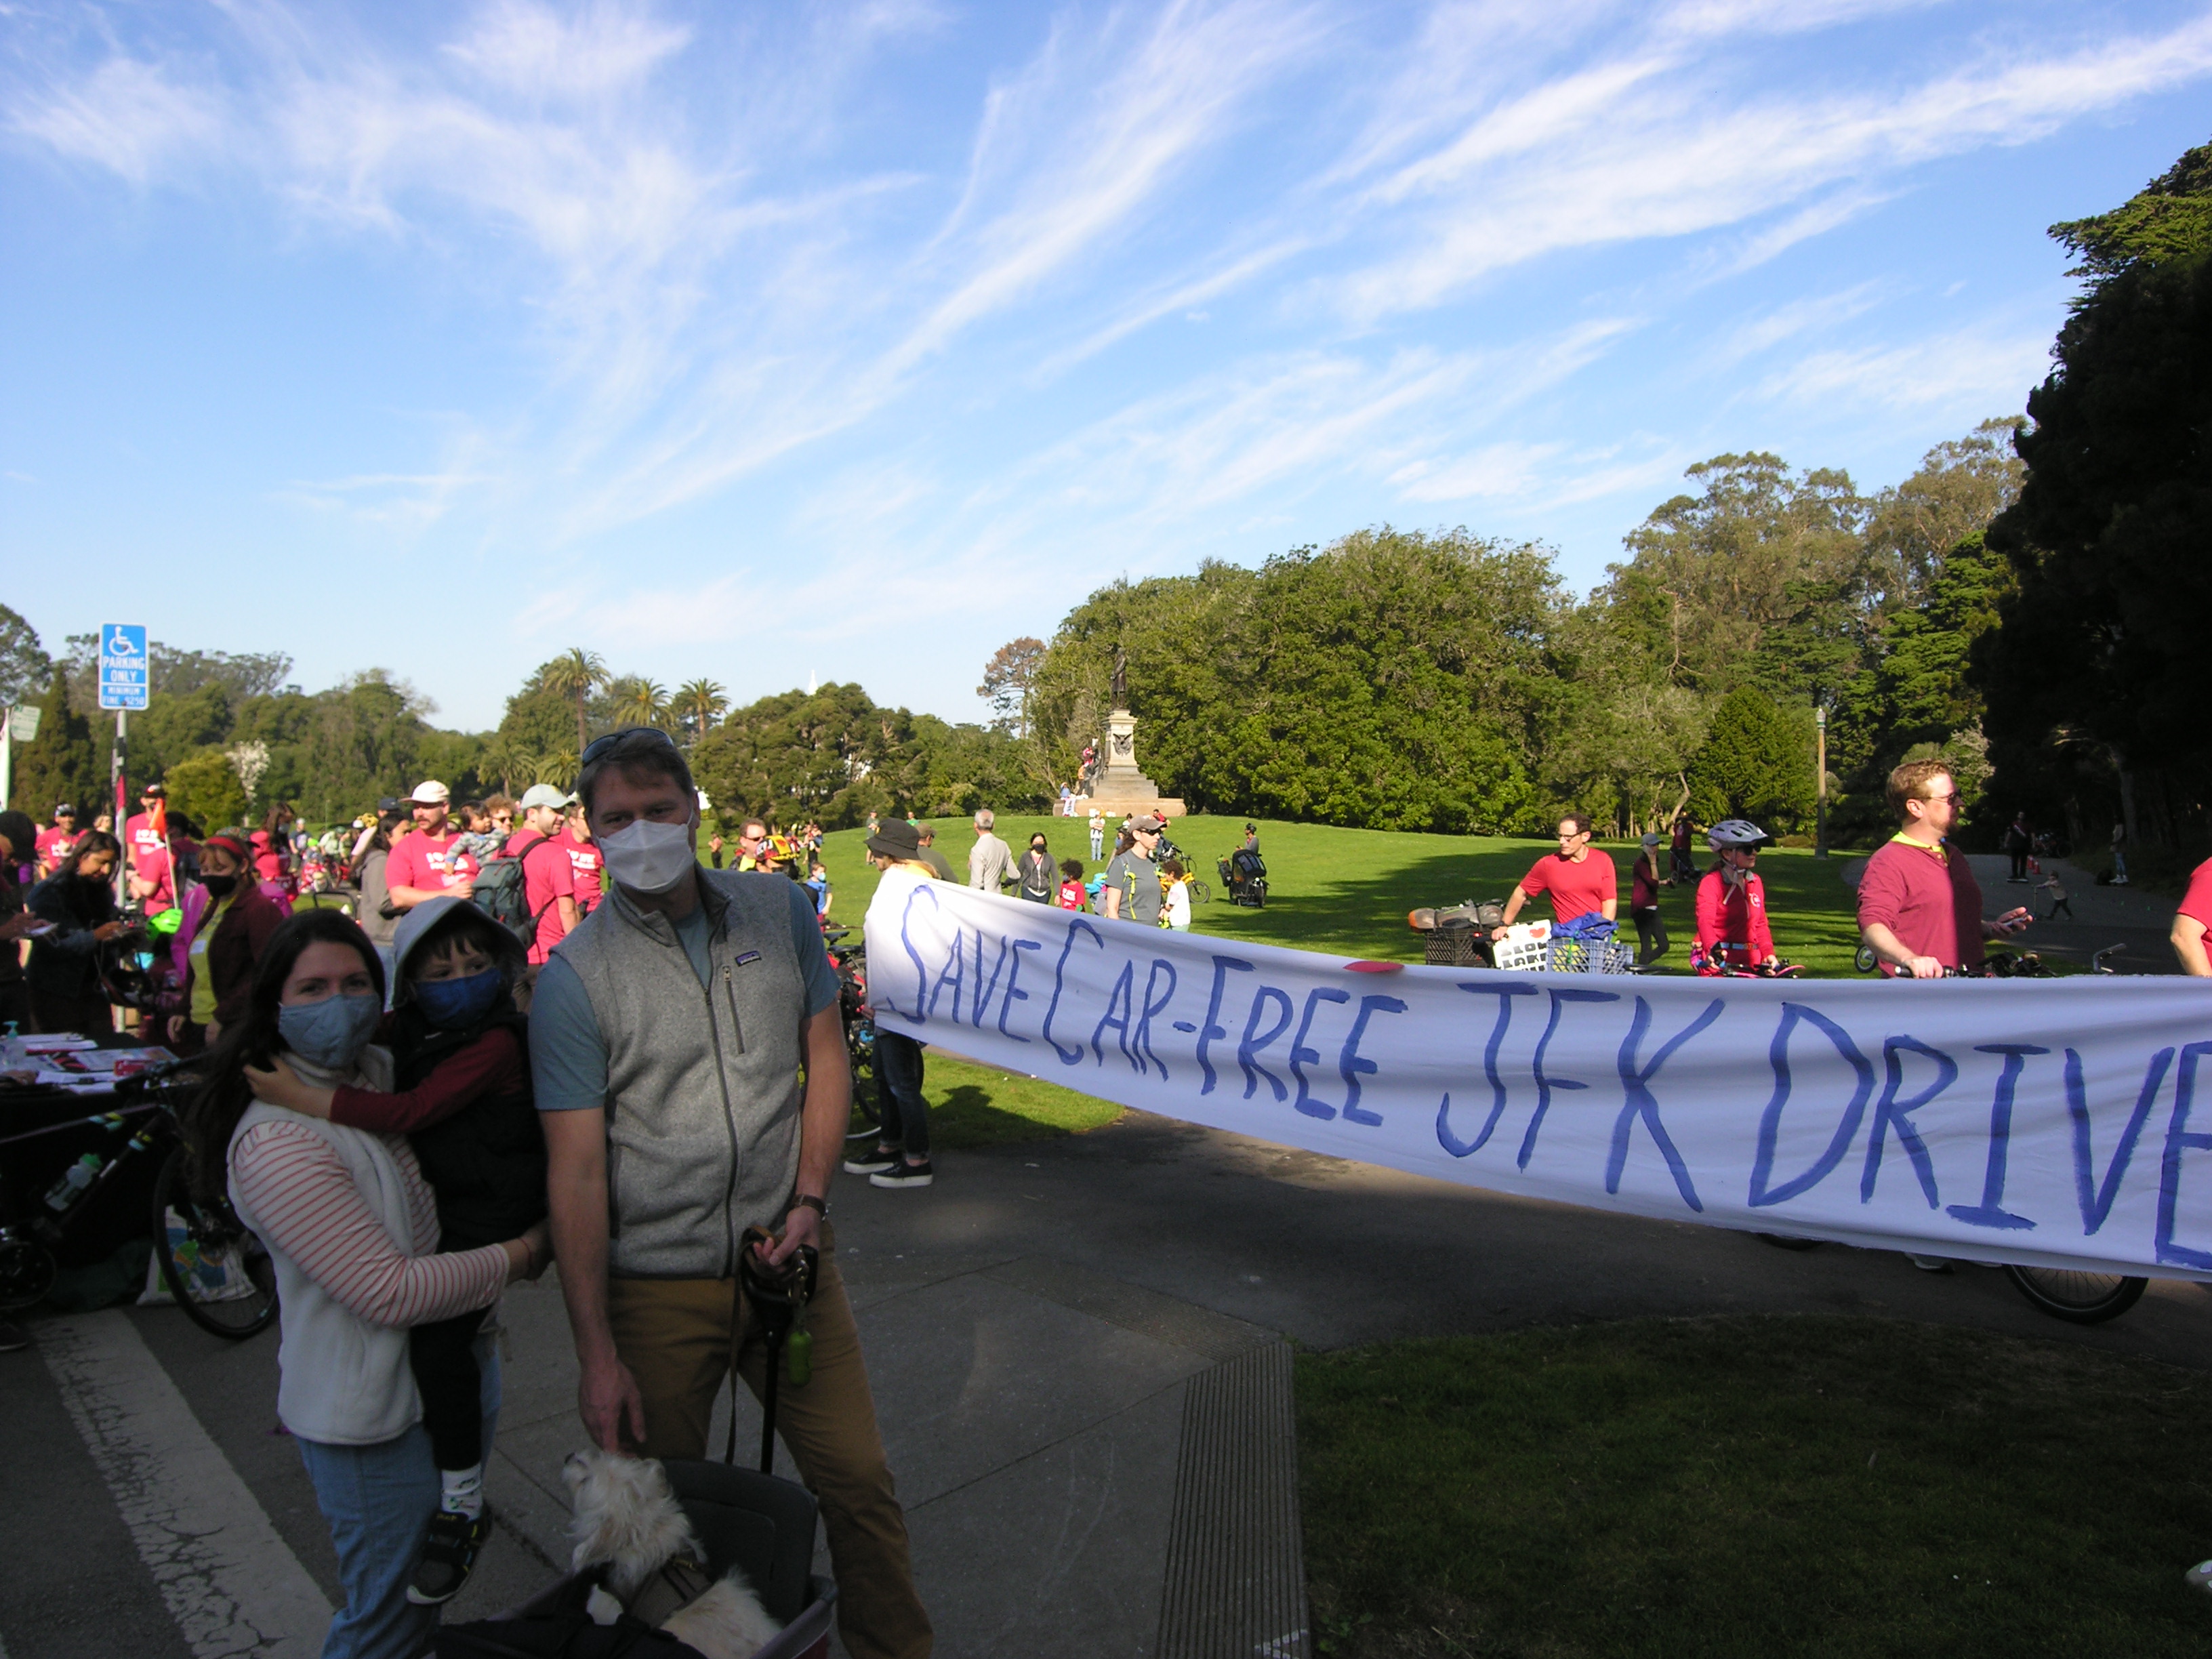 Sierra Club activists protesting in support of a car-free JFK Drive